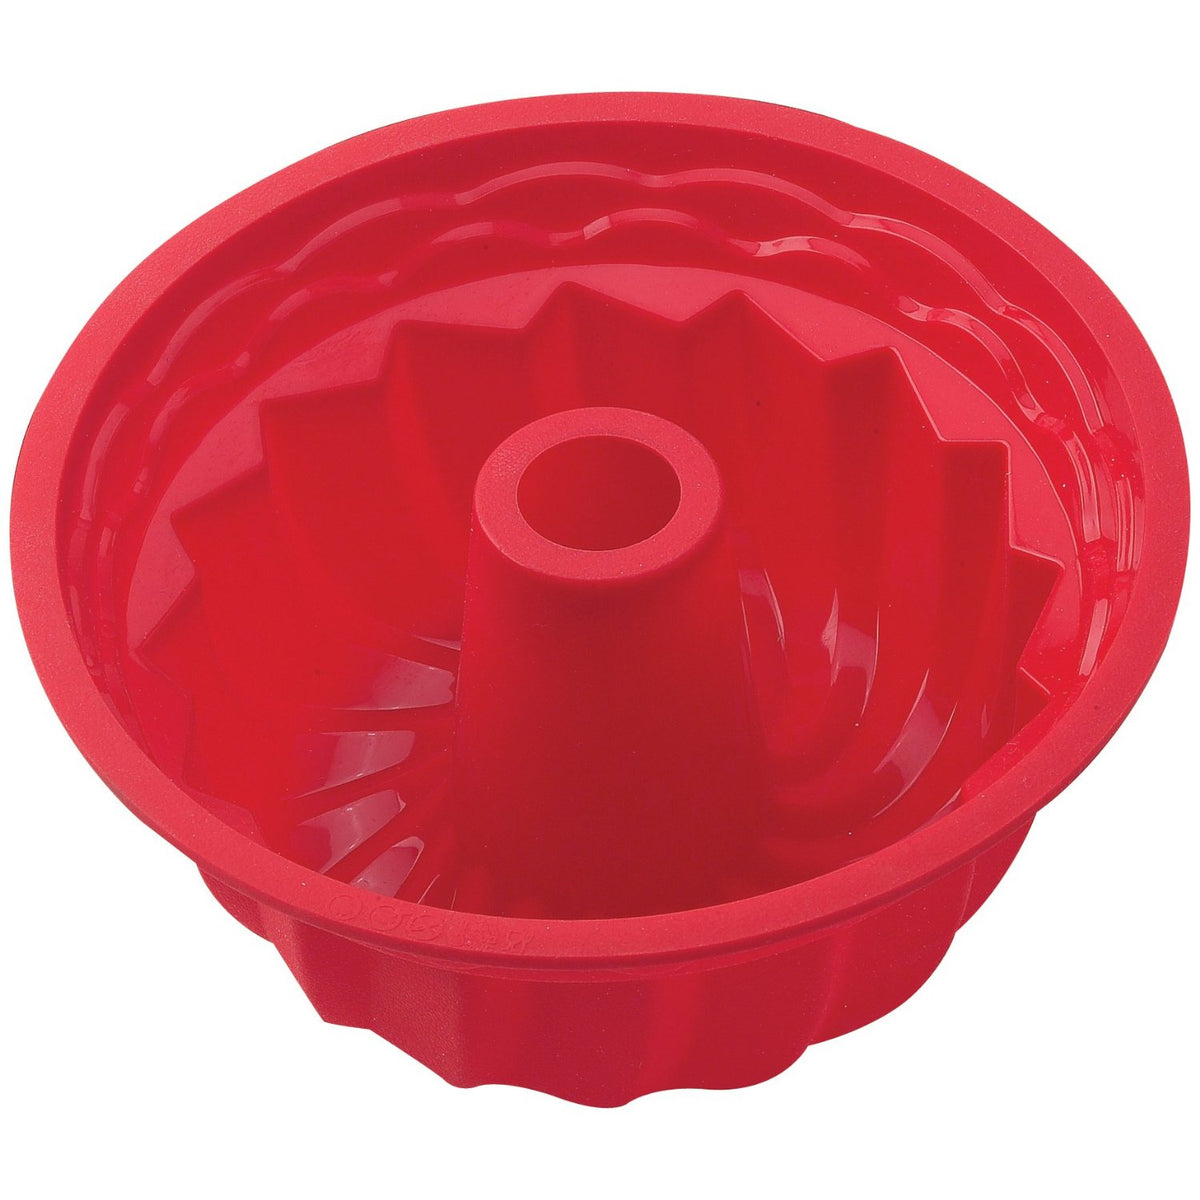 The Essentials 43633 Silicone Deep Fluted Pan, 9-1/2" x 4"